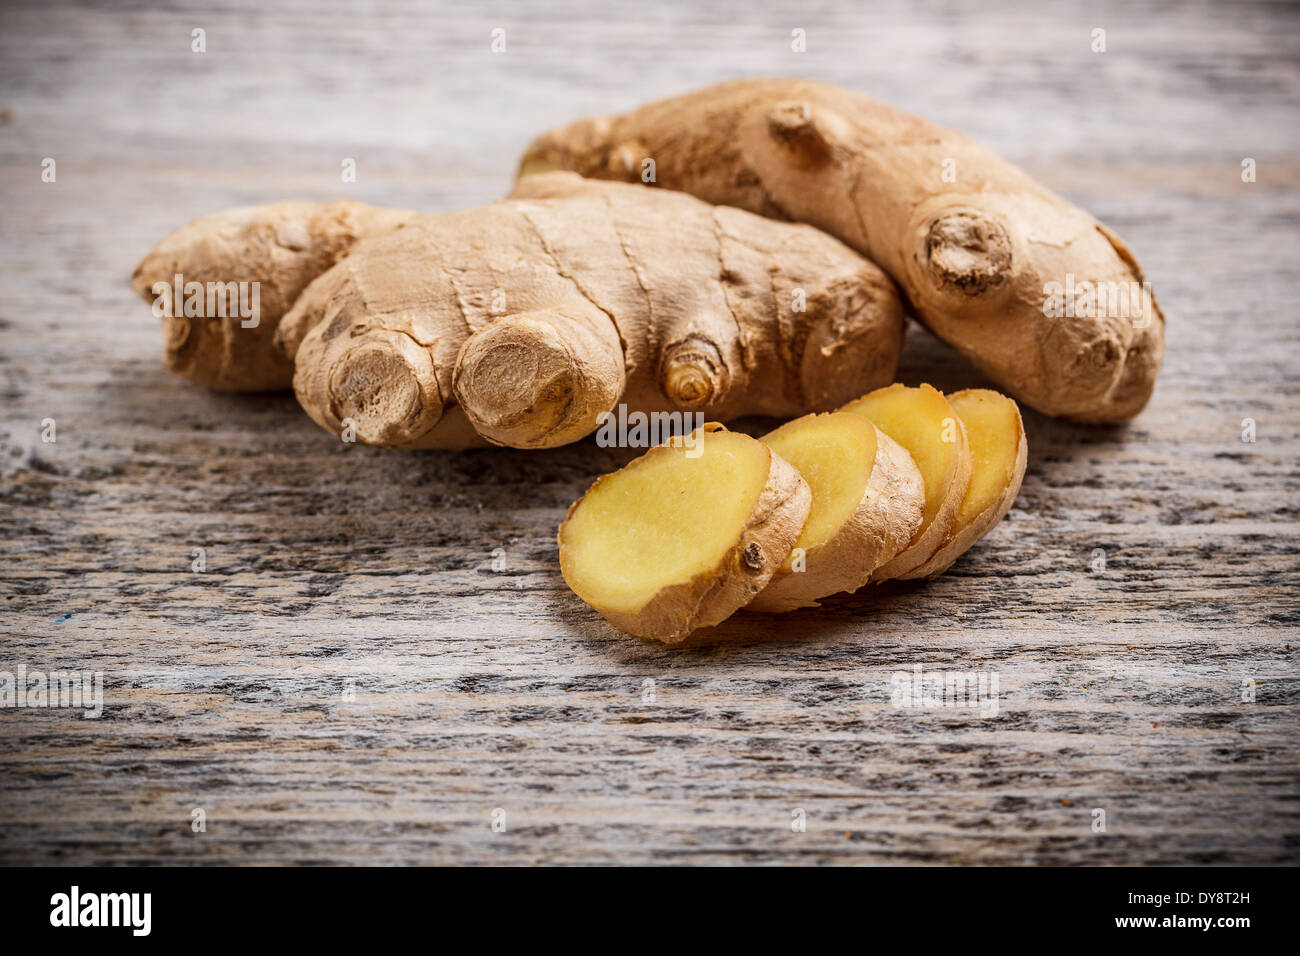 Ginger root sliced on wooden table Stock Photo